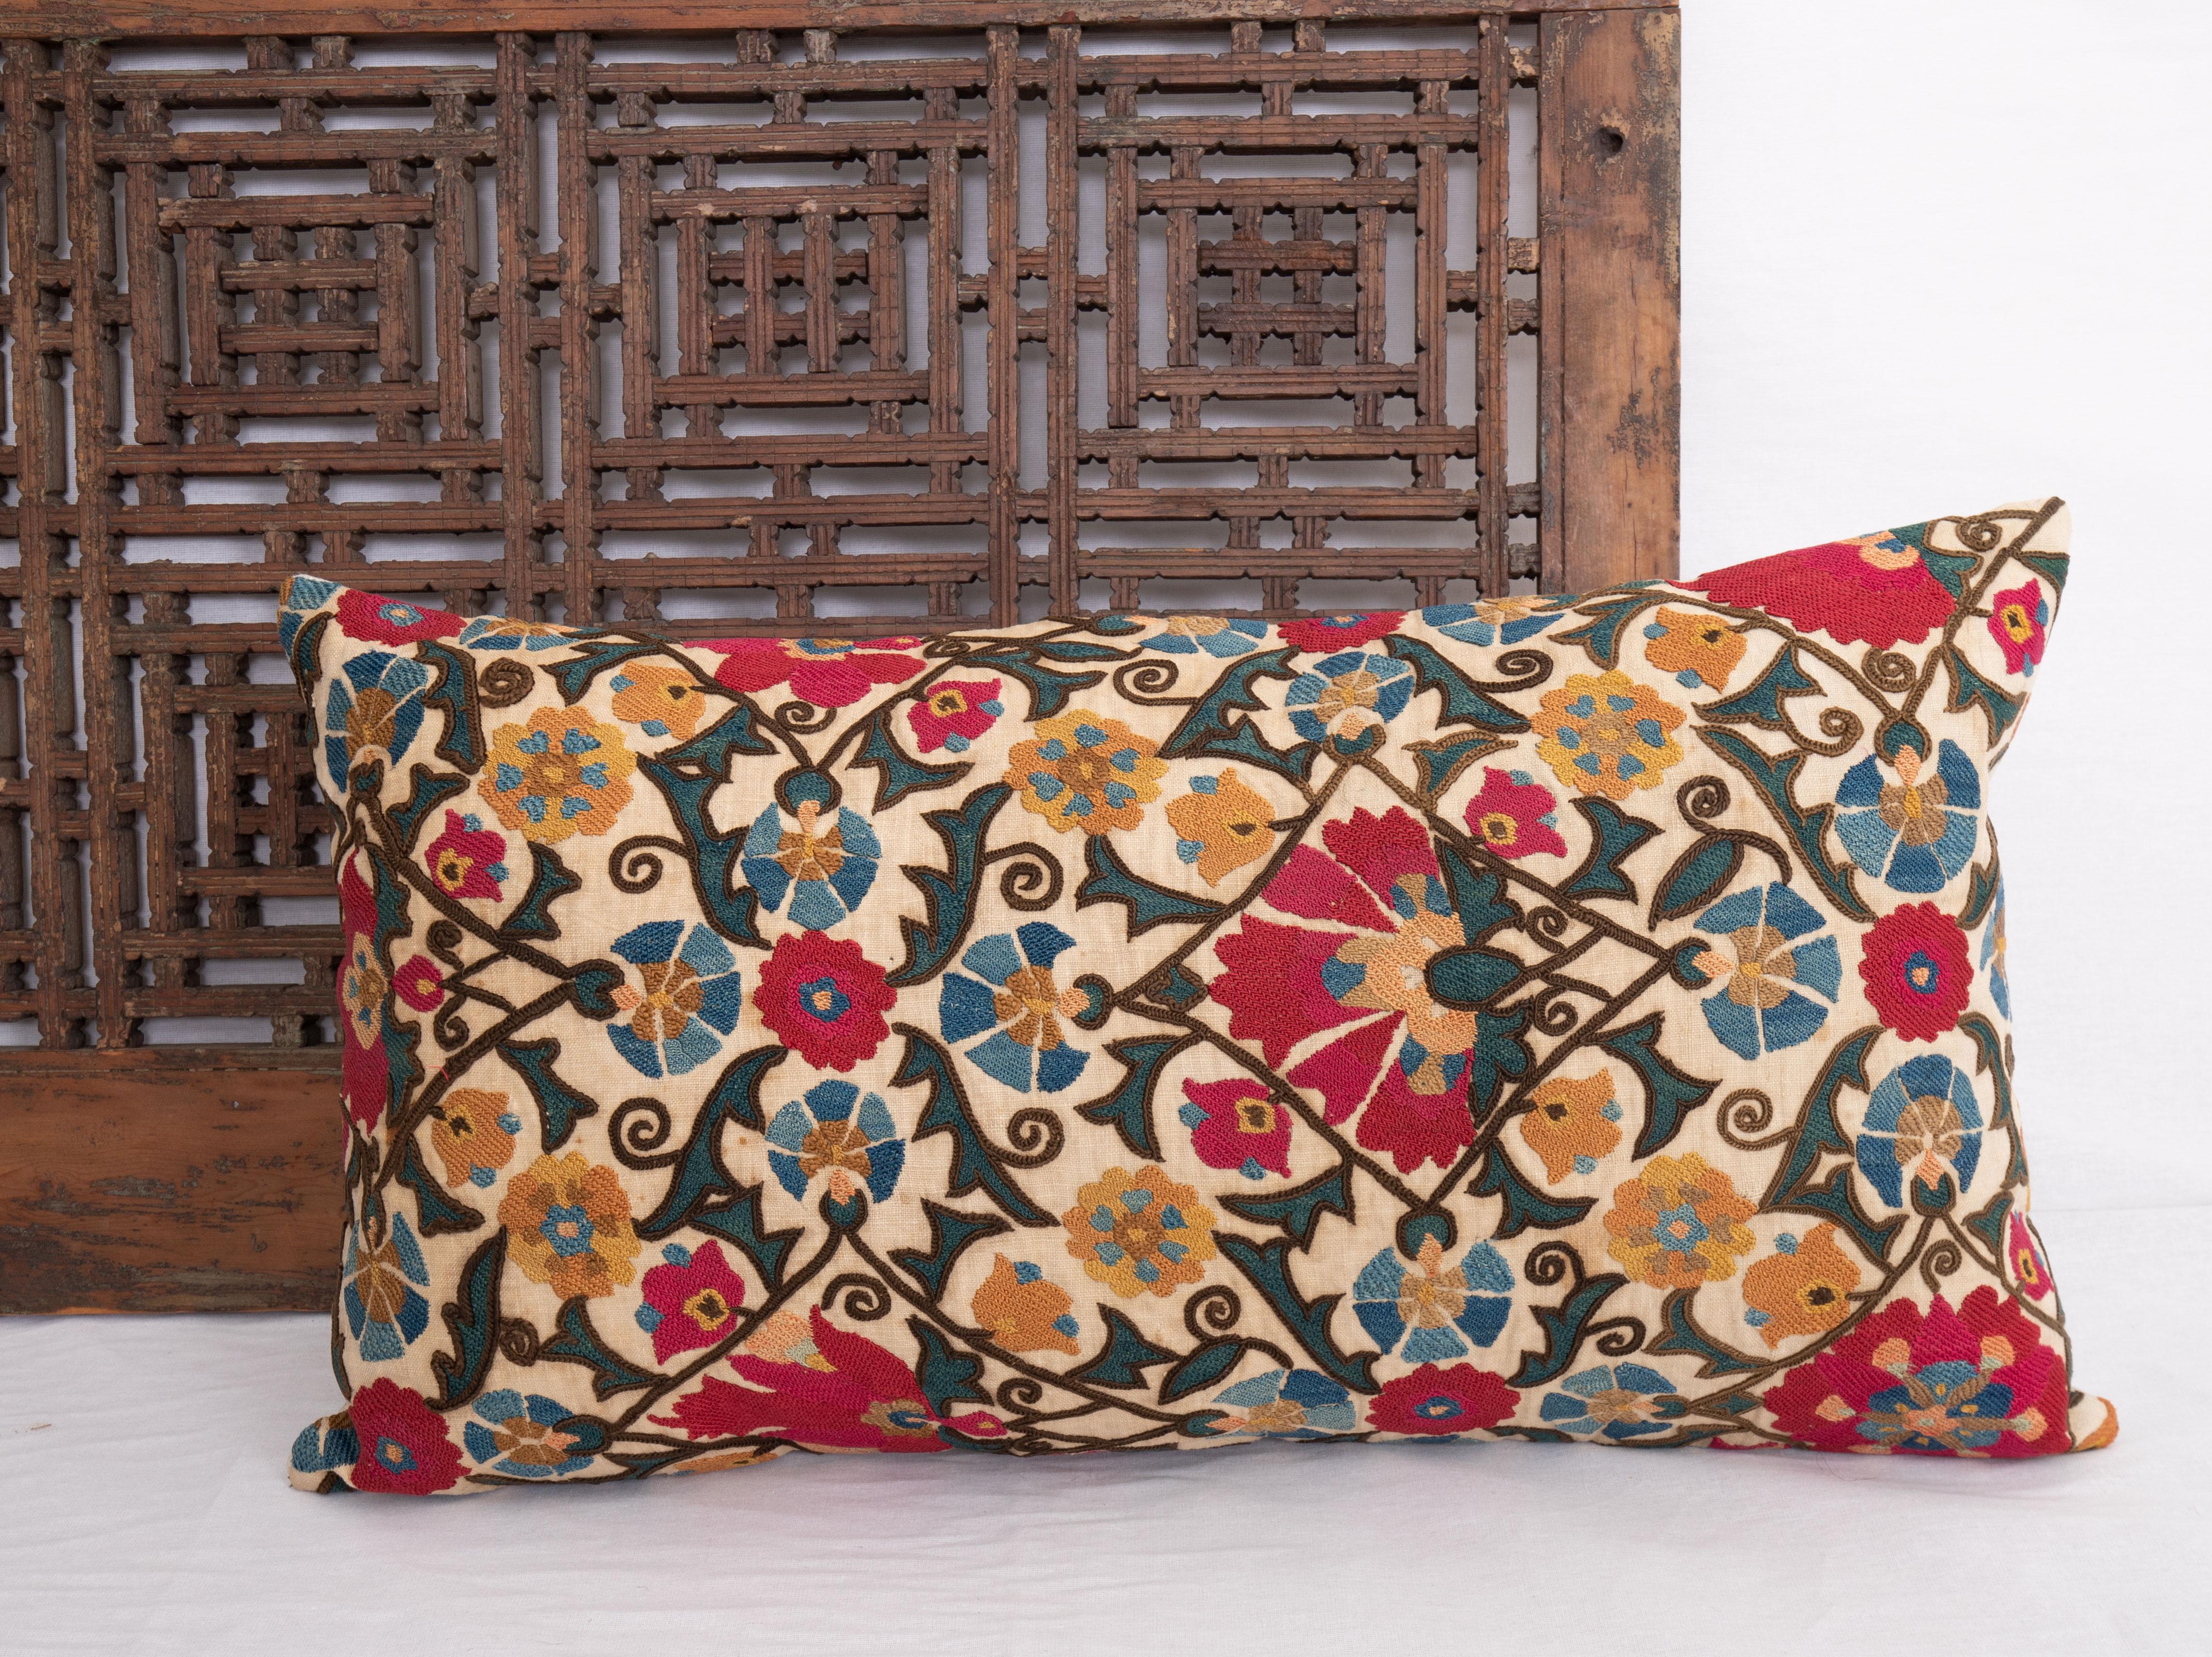 Silk Suzani Pillow Case Made from an Antique Suzani Fragment, 19th Century